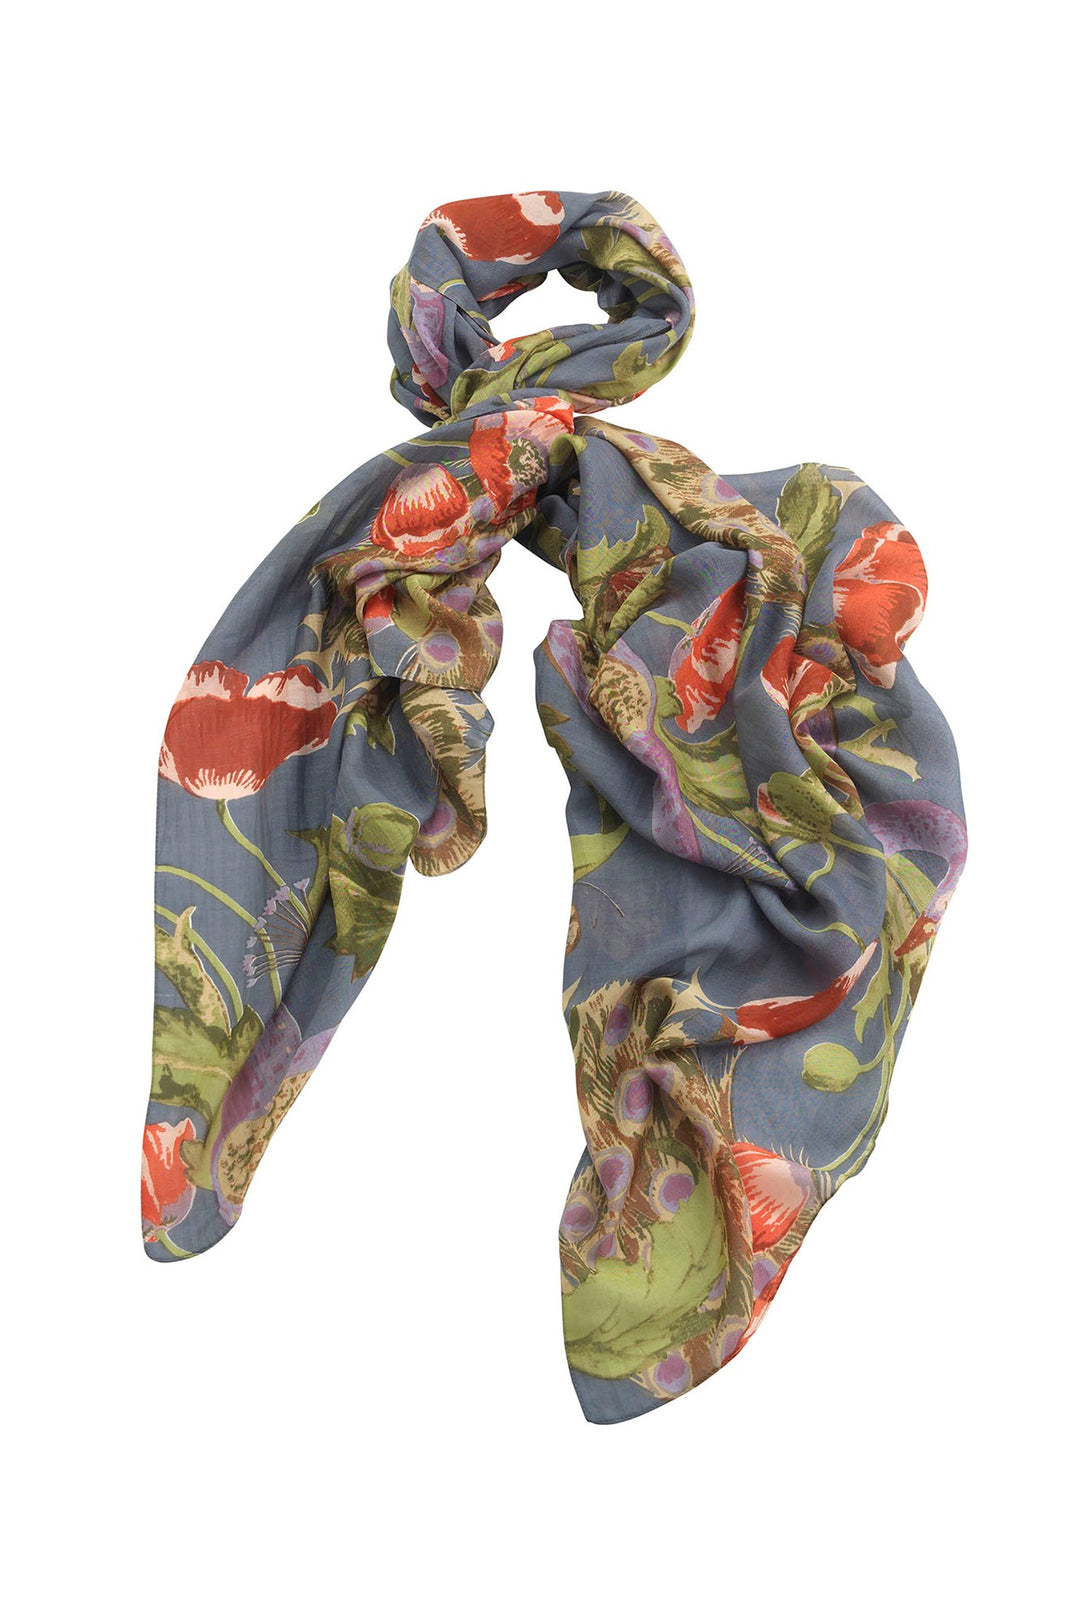 One Hundred Stars Peacock and Poppies Grey Scarf- Our scarves are a full 100cm x 200cm making them perfect for layering in the winter months or worn as a delicate cover up during the summer seasons. 